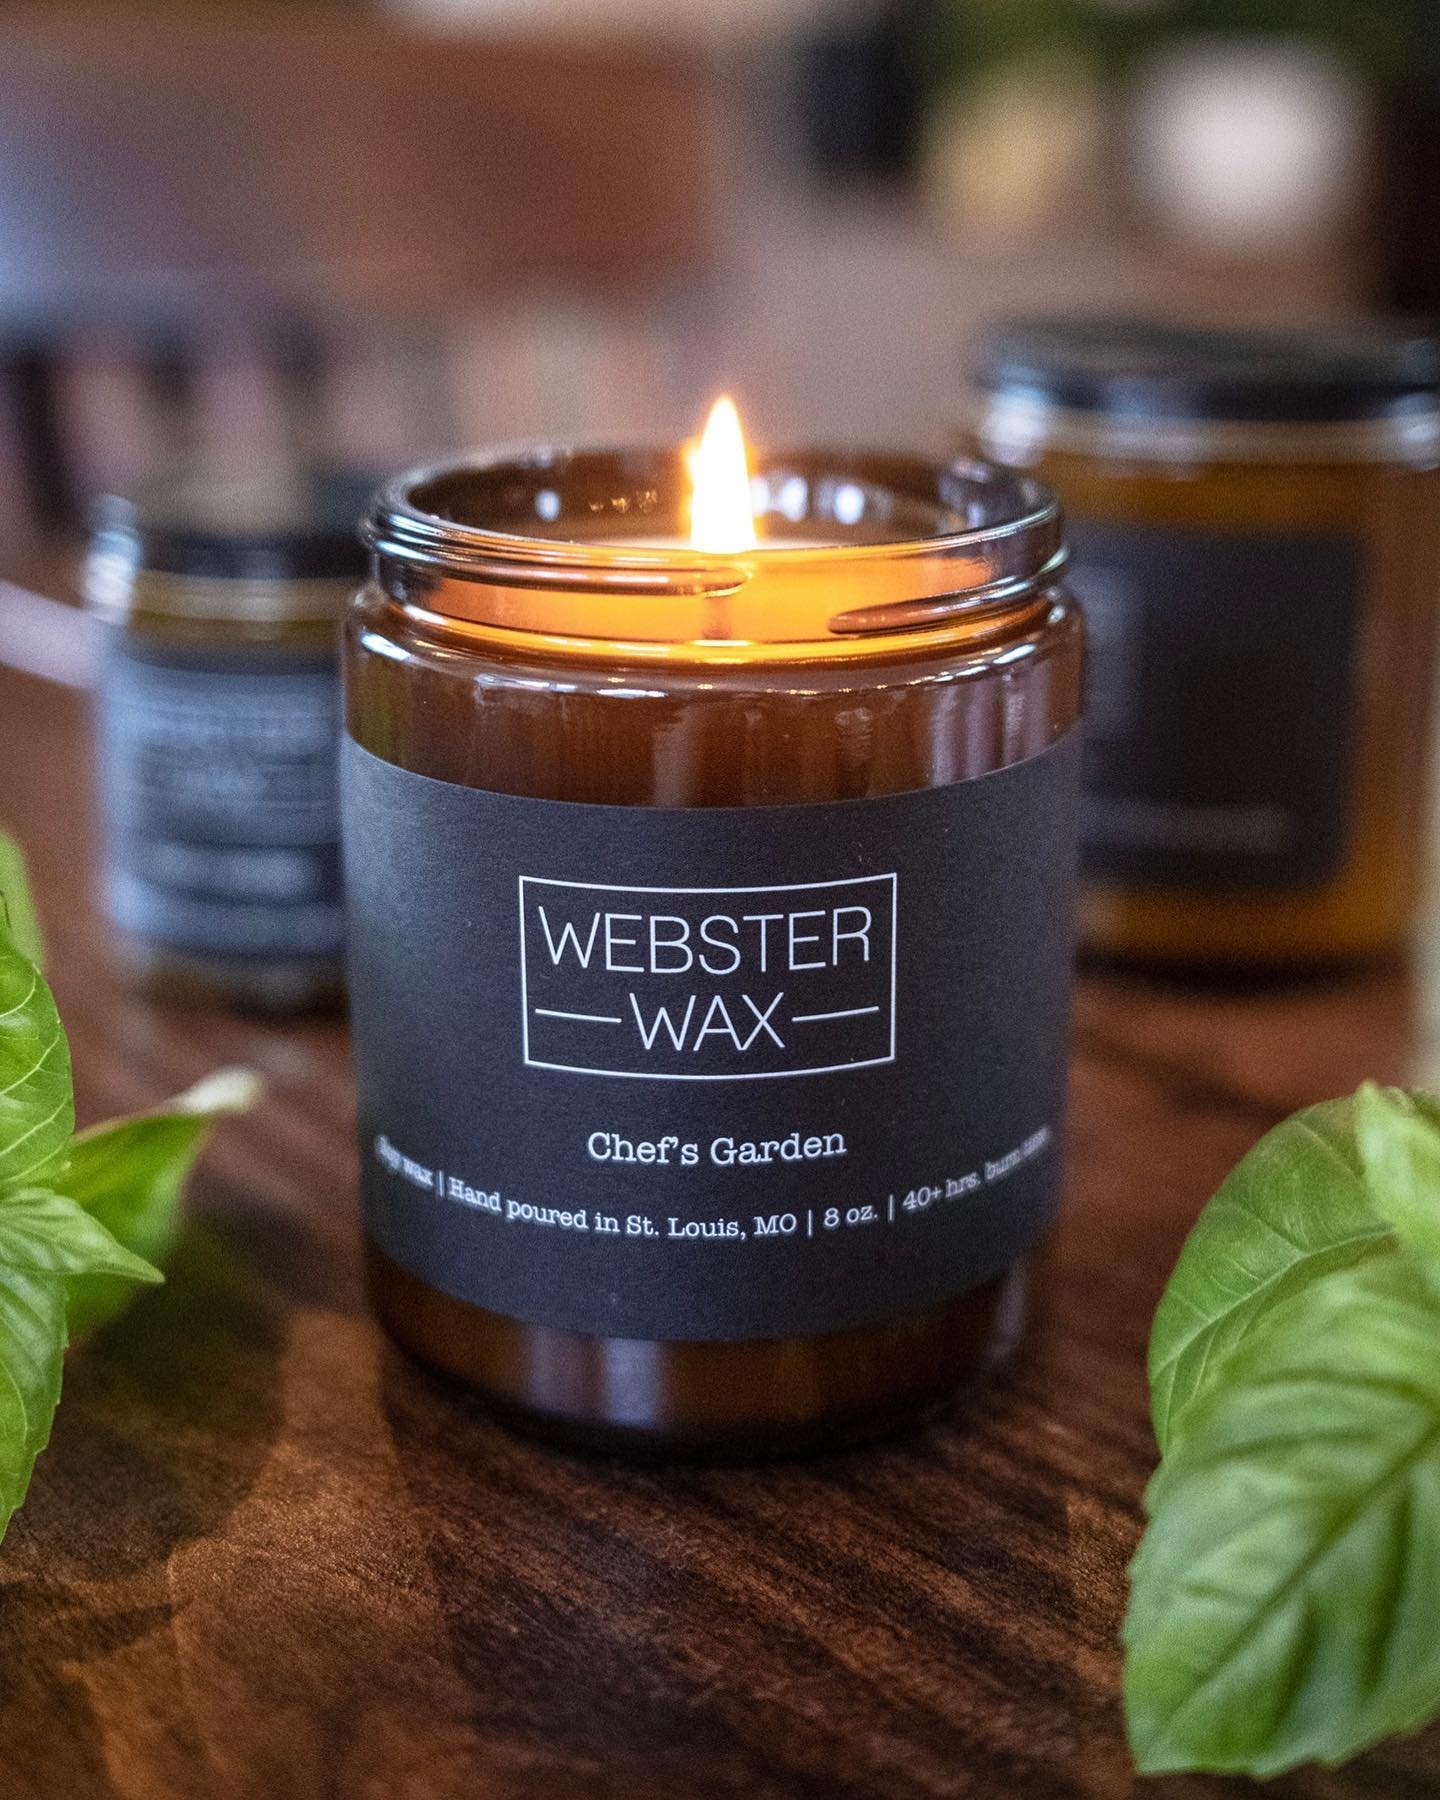 Webster Wax candles are now available in our shop! These soy wax candles are hand poured in St. Louis and we have 5 different scents to choose from. Our personal favorite is Chef&rsquo;s Garden🕯️🌿